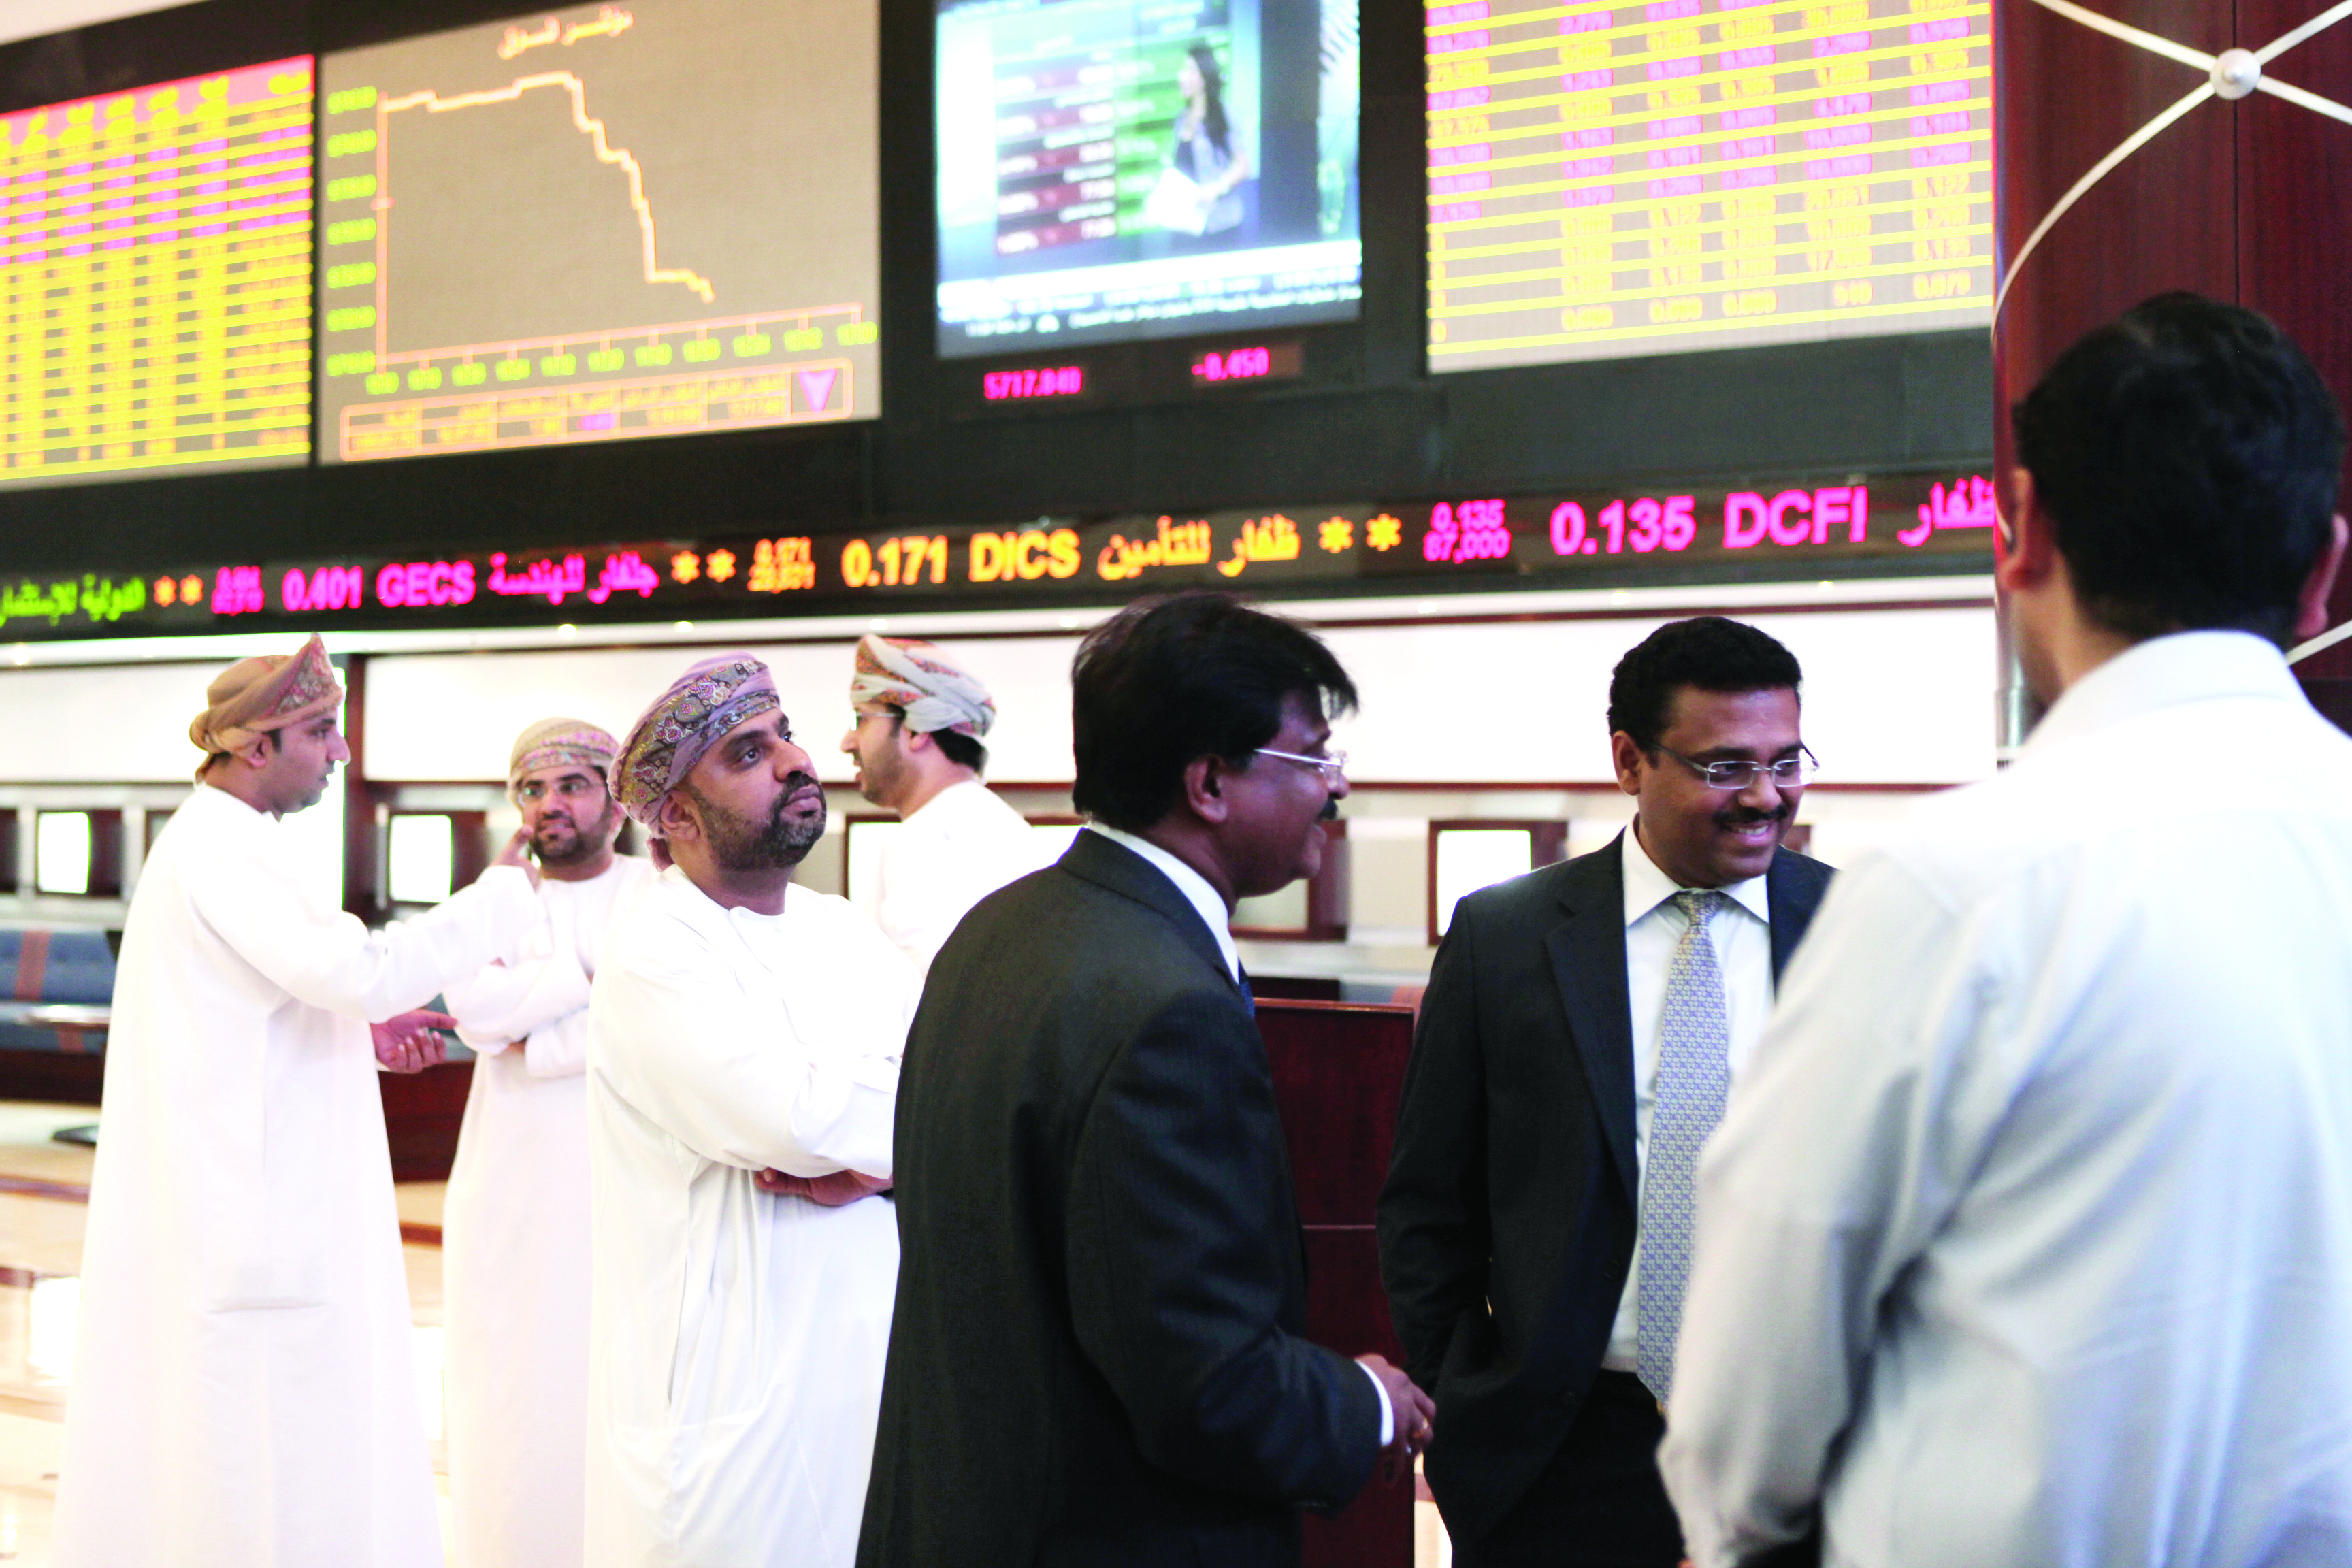 OMR7.4 billion Foreign Direct Investments in Oman last year